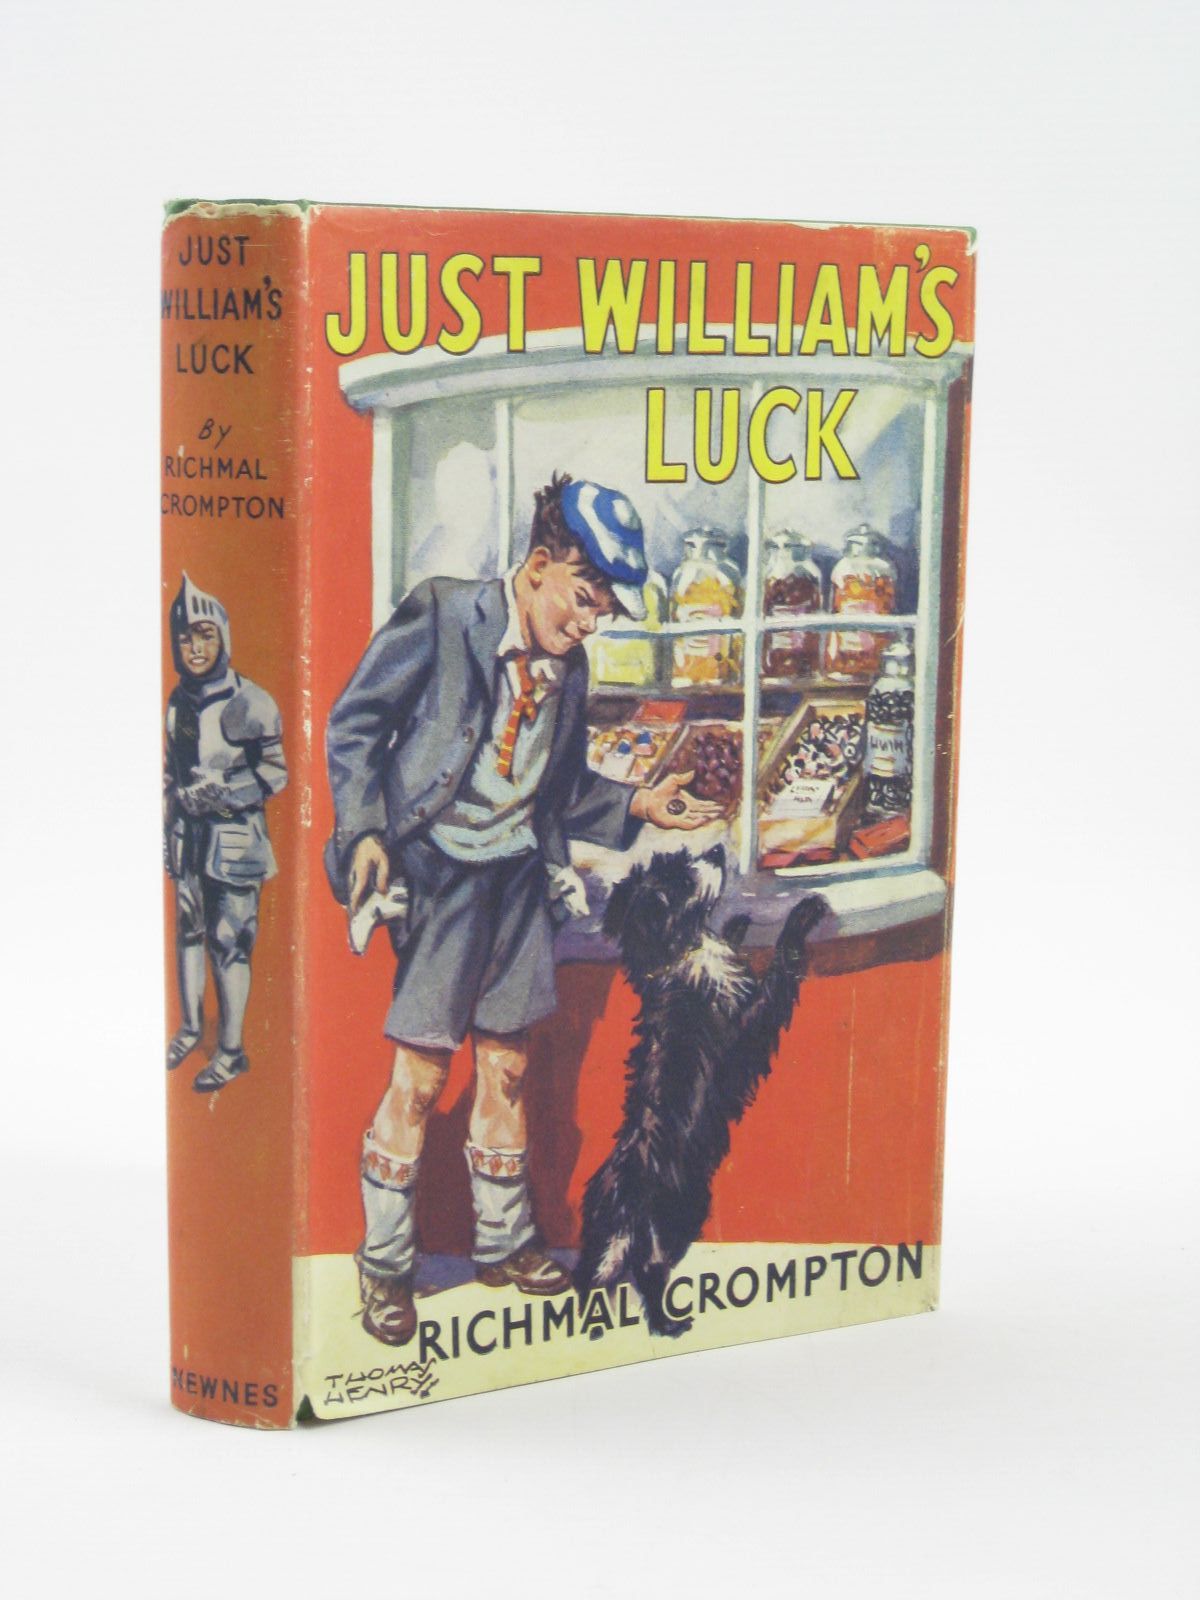 Cover of JUST WILLIAM'S LUCK by Richmal Crompton